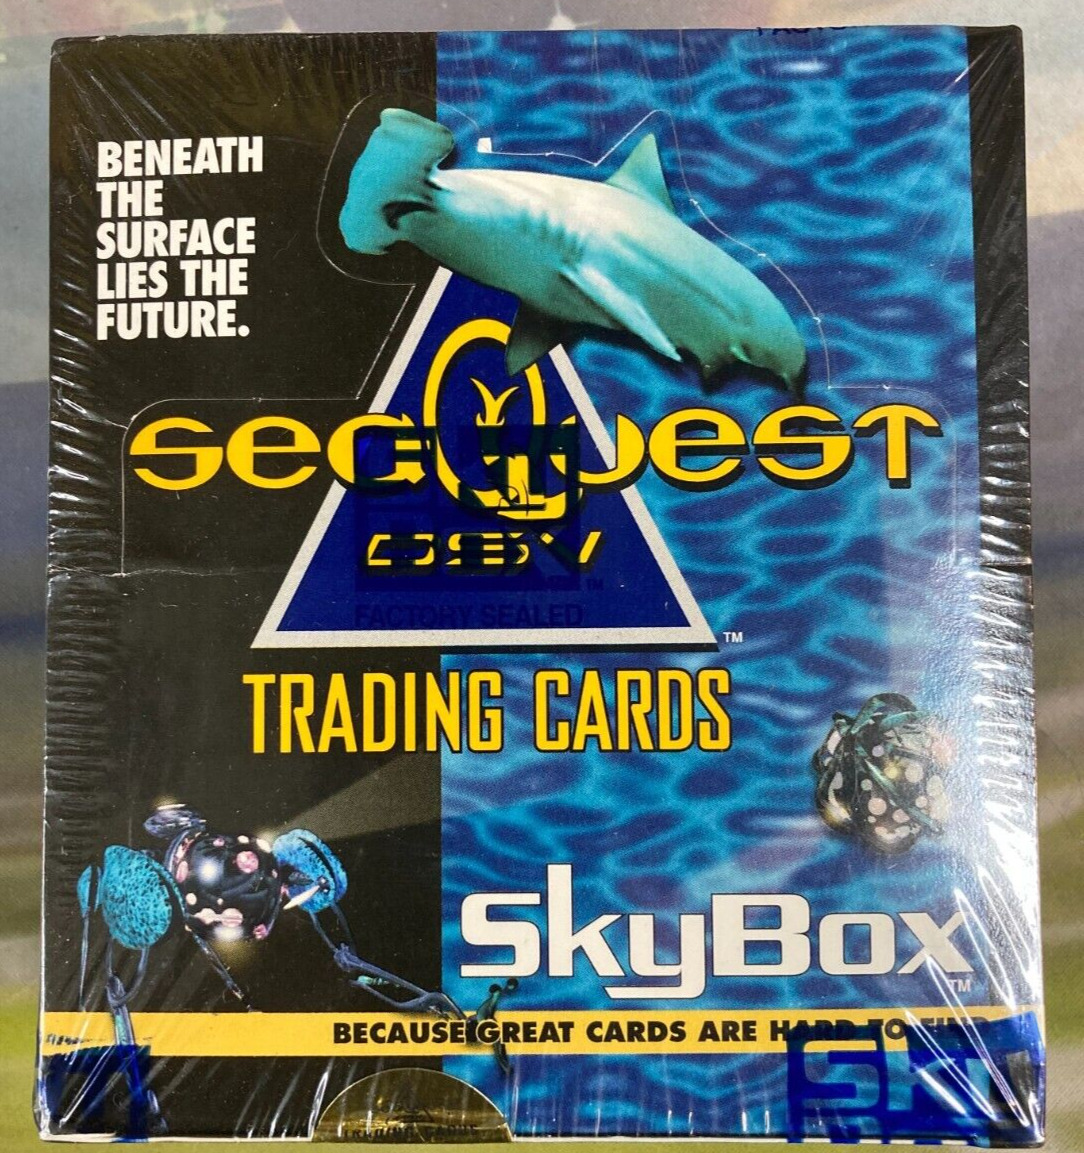 SEAQUEST DSV SKYBOX Trading Card Box. Factory Sealed. 36 Packs